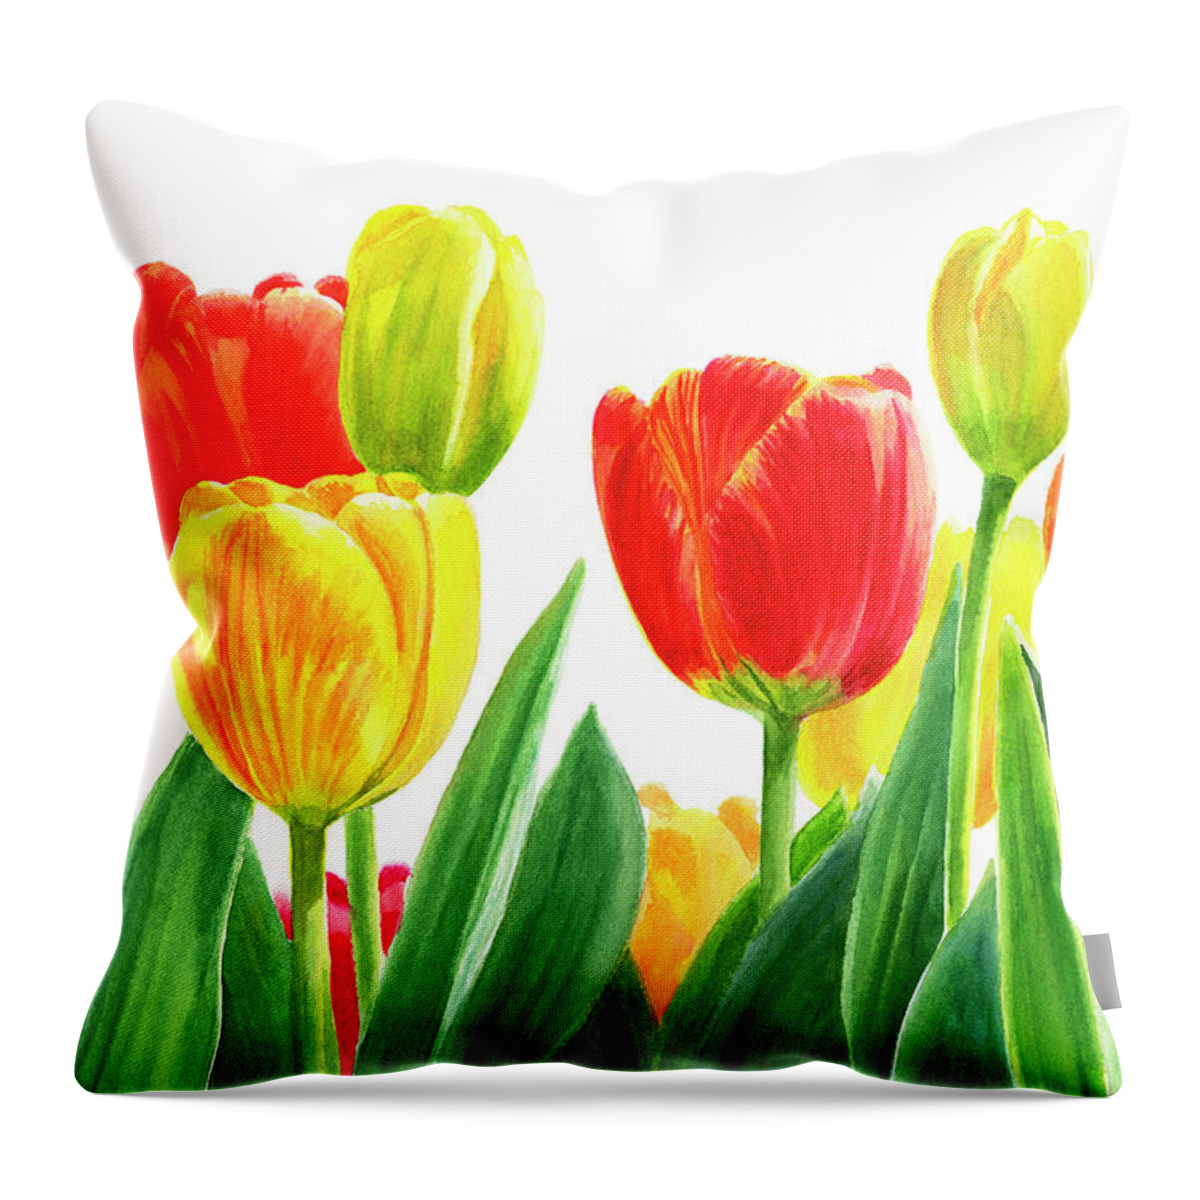 Tulips Throw Pillow featuring the painting Orange and Yellow Tulips Horizontal Design by Sharon Freeman